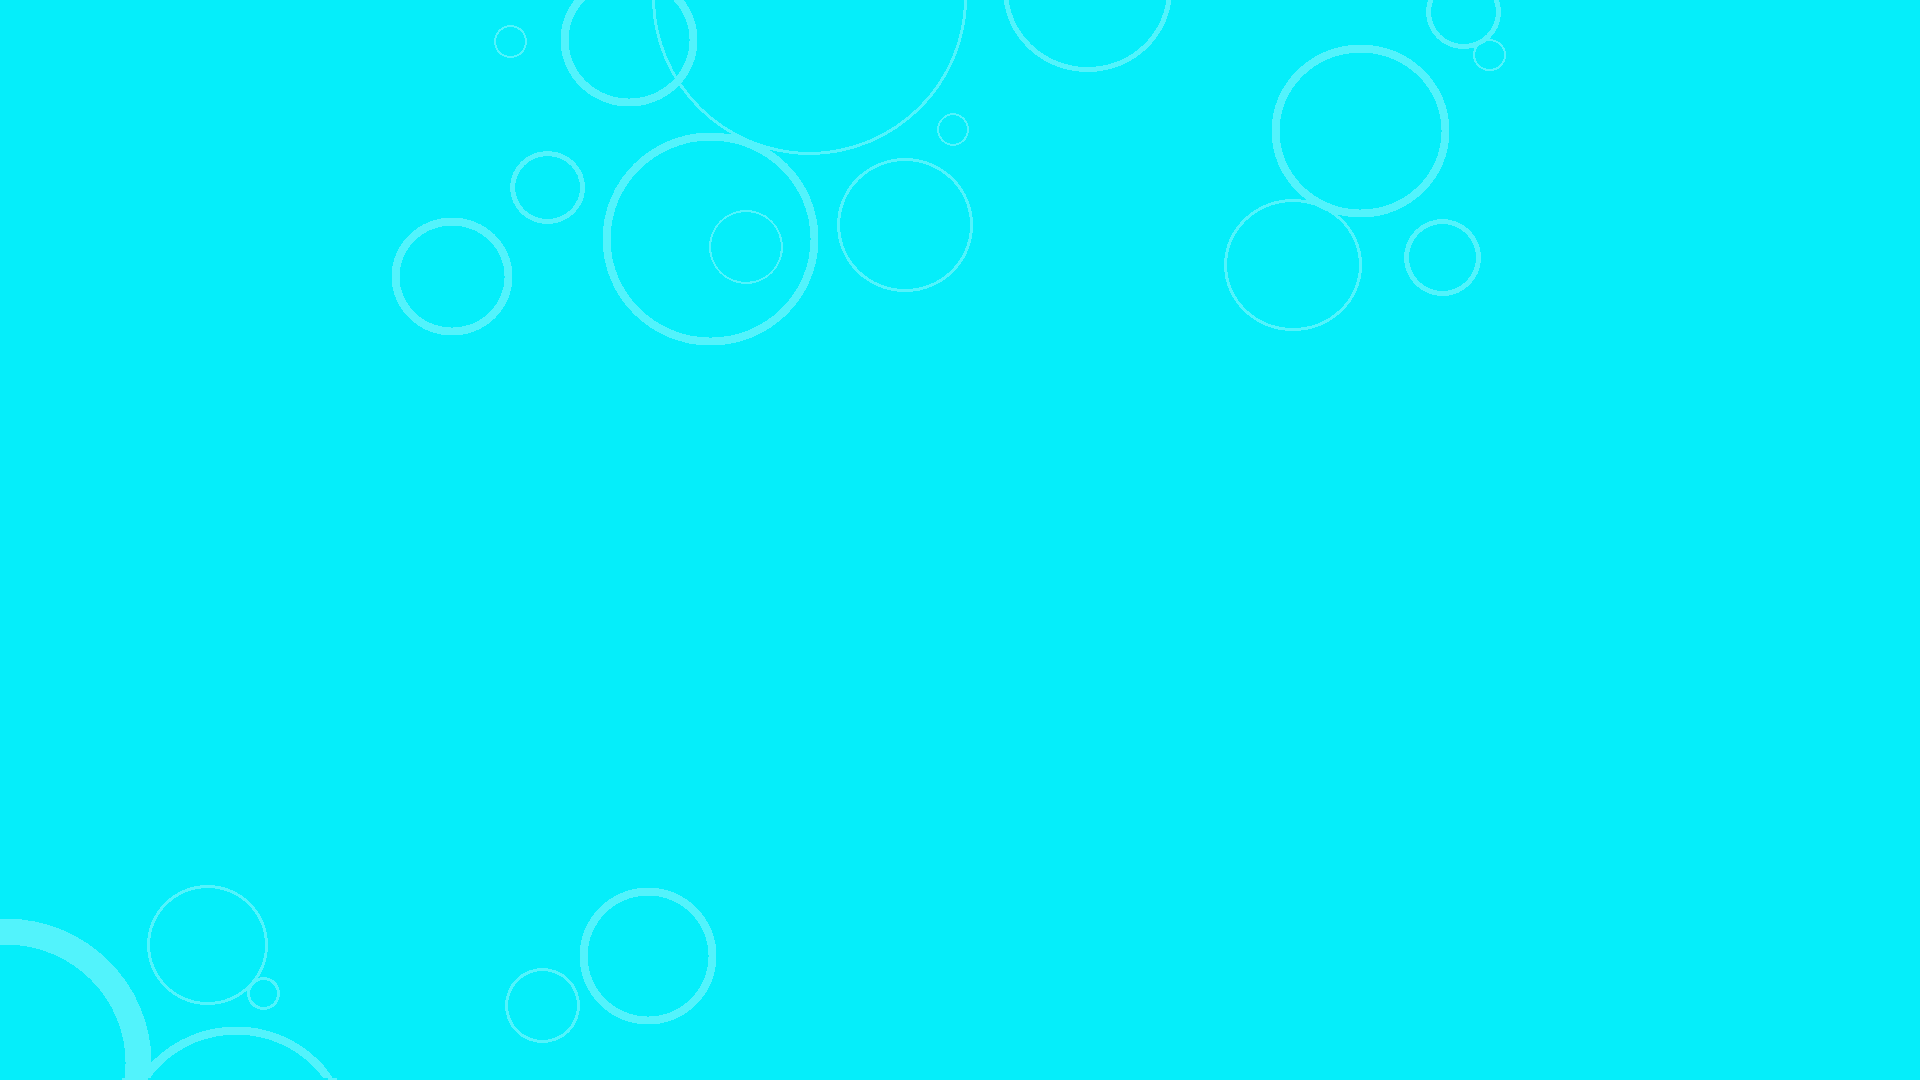 Neon Blue Windows 8 Wallpaper by gifteddeviant on